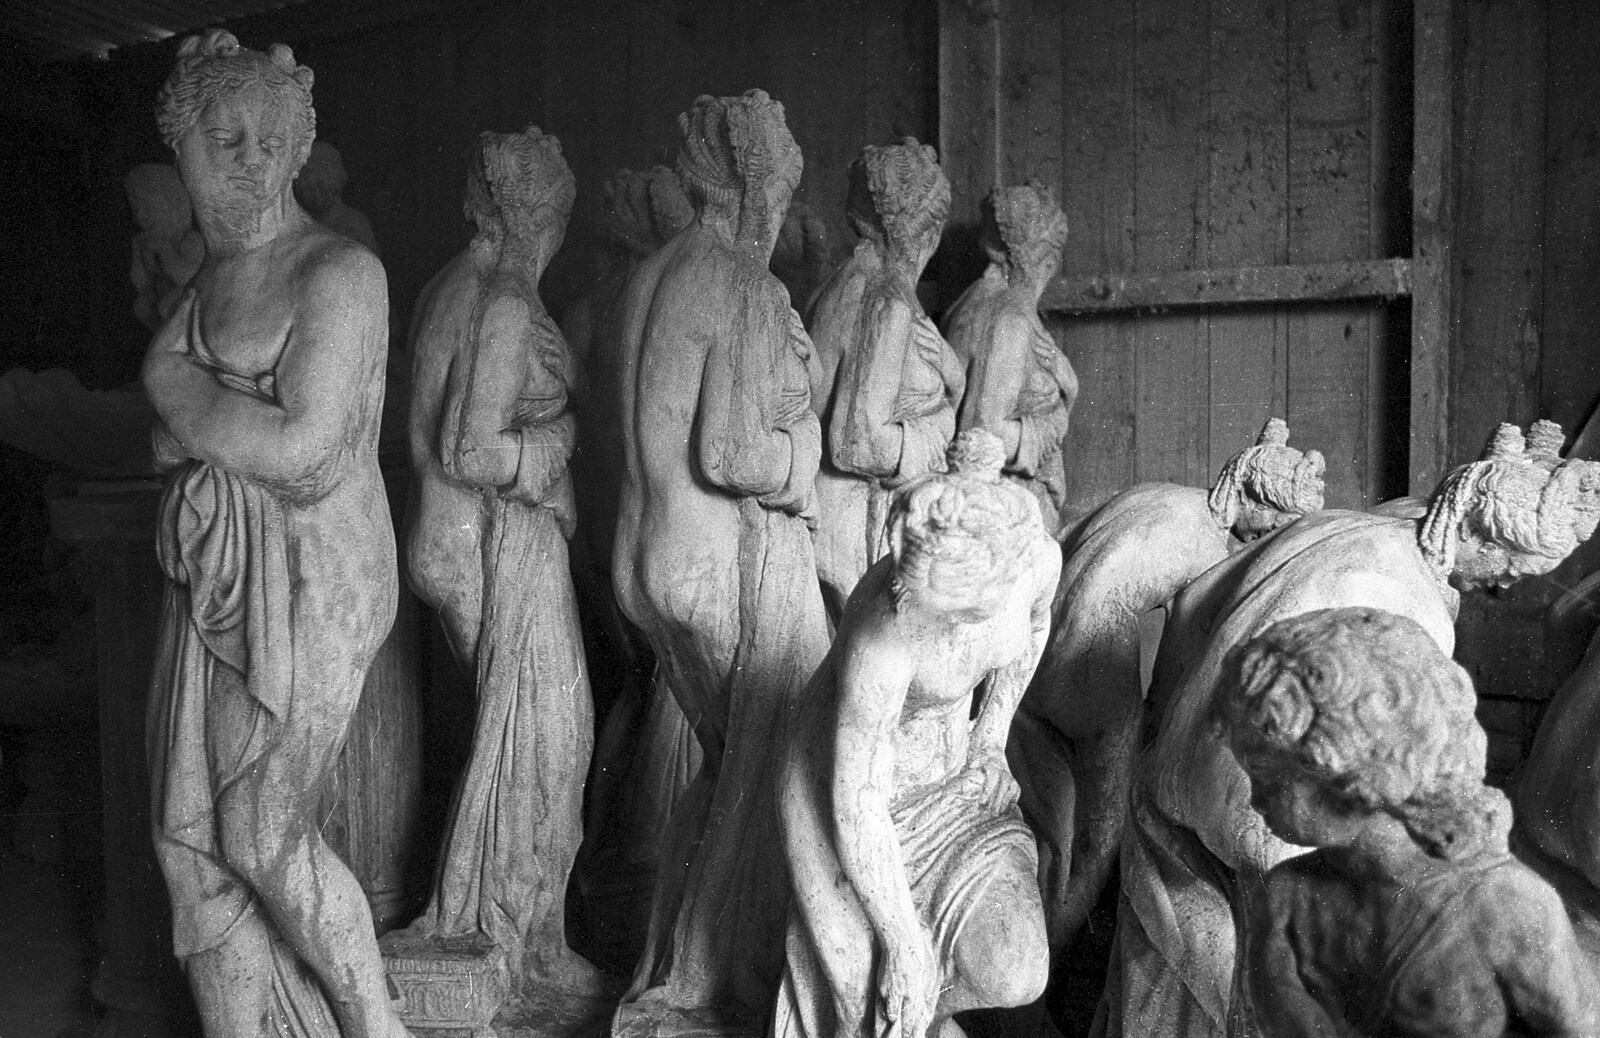 A Black and White Life in Concrete, Stuston, Suffolk - 3rd September 1992: Aphrodites in the shed